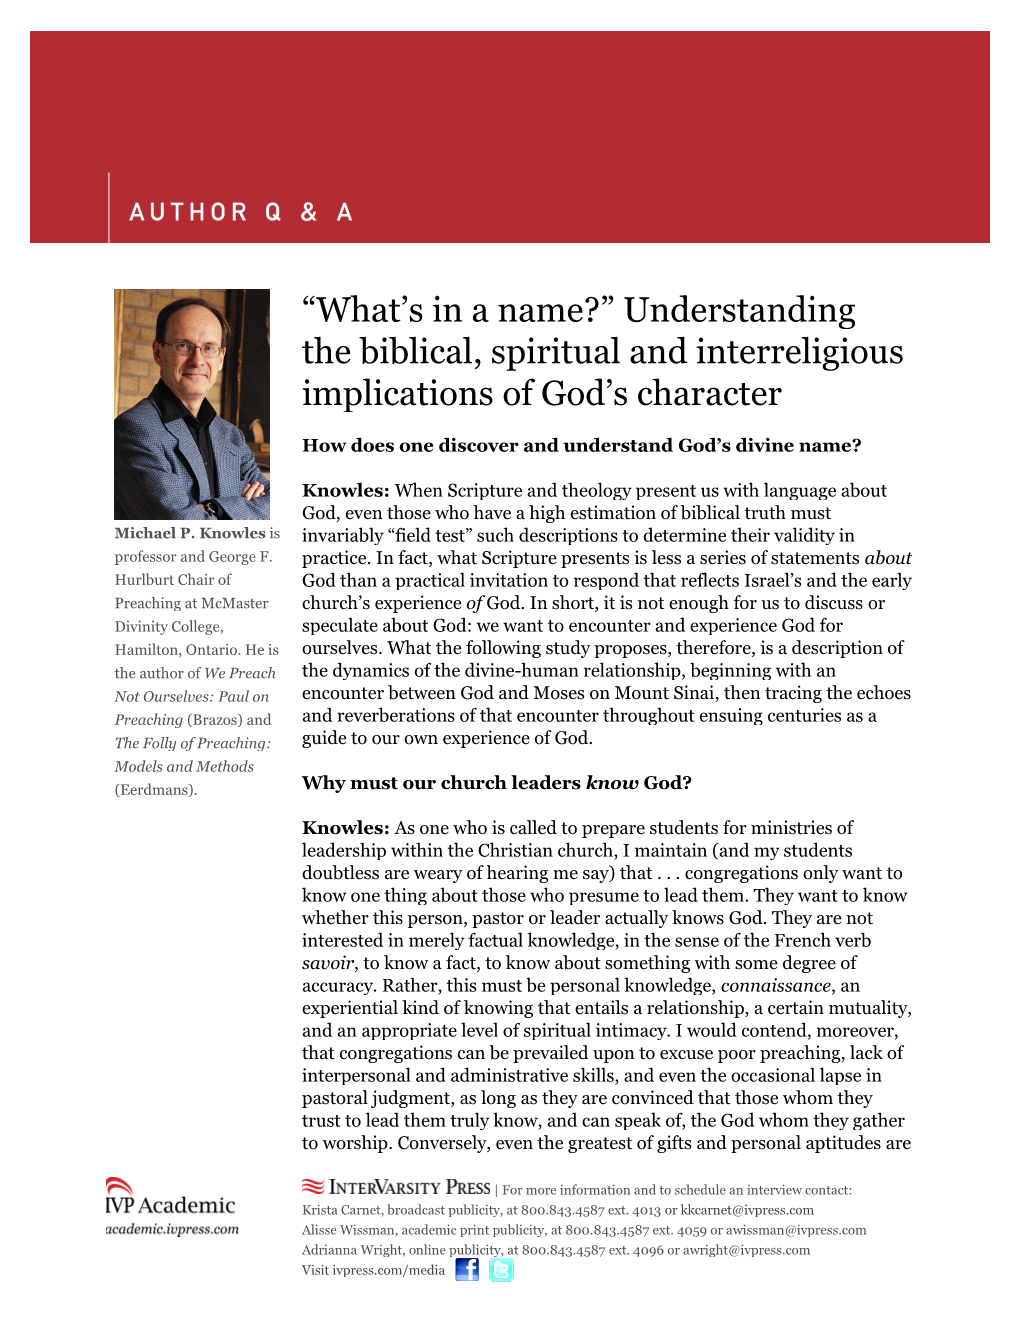 Understanding the Biblical, Spiritual and Interreligious Implications of God’S Character